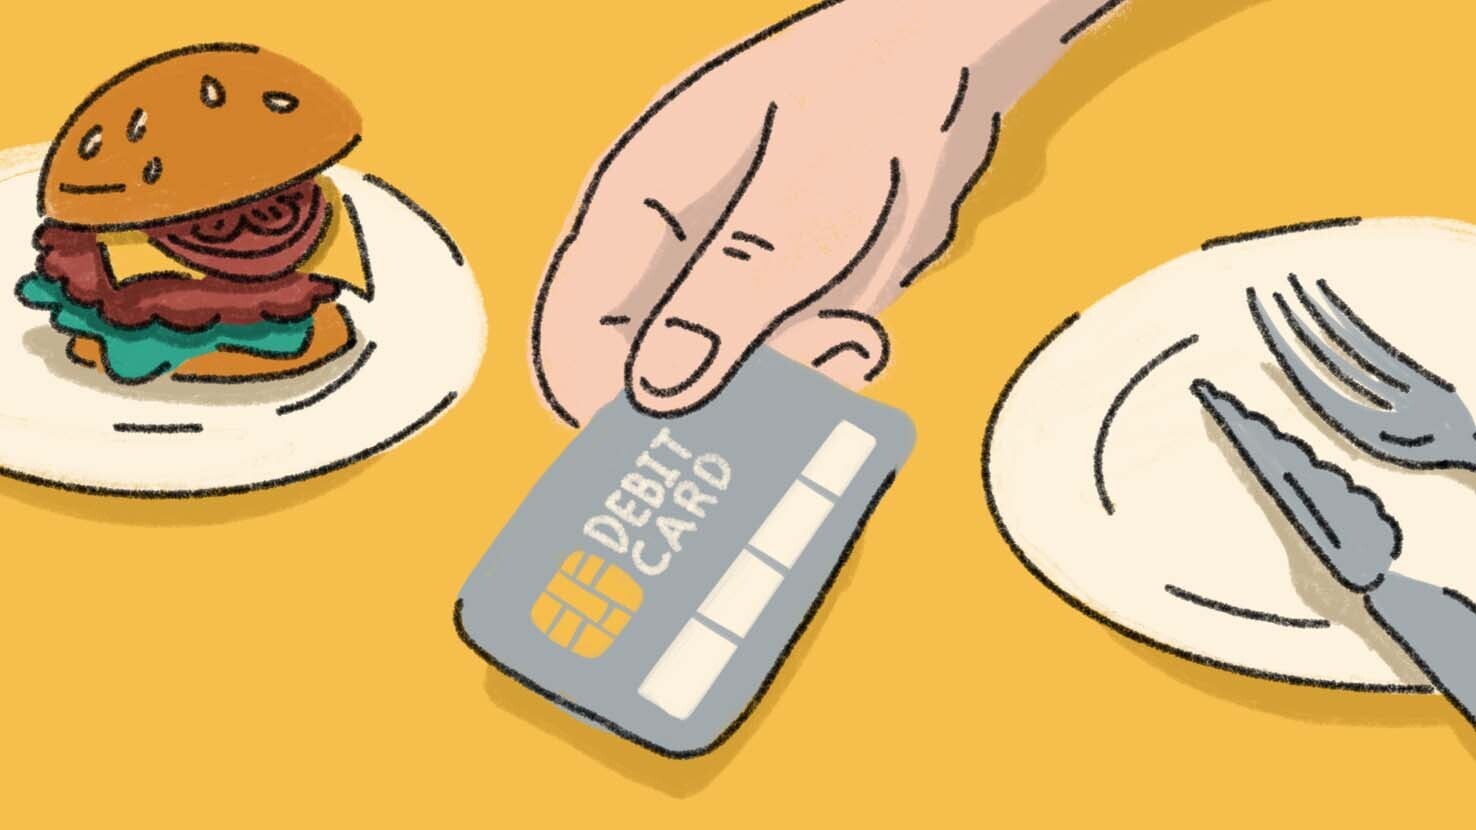 Illustration of a hand passing a debit card.